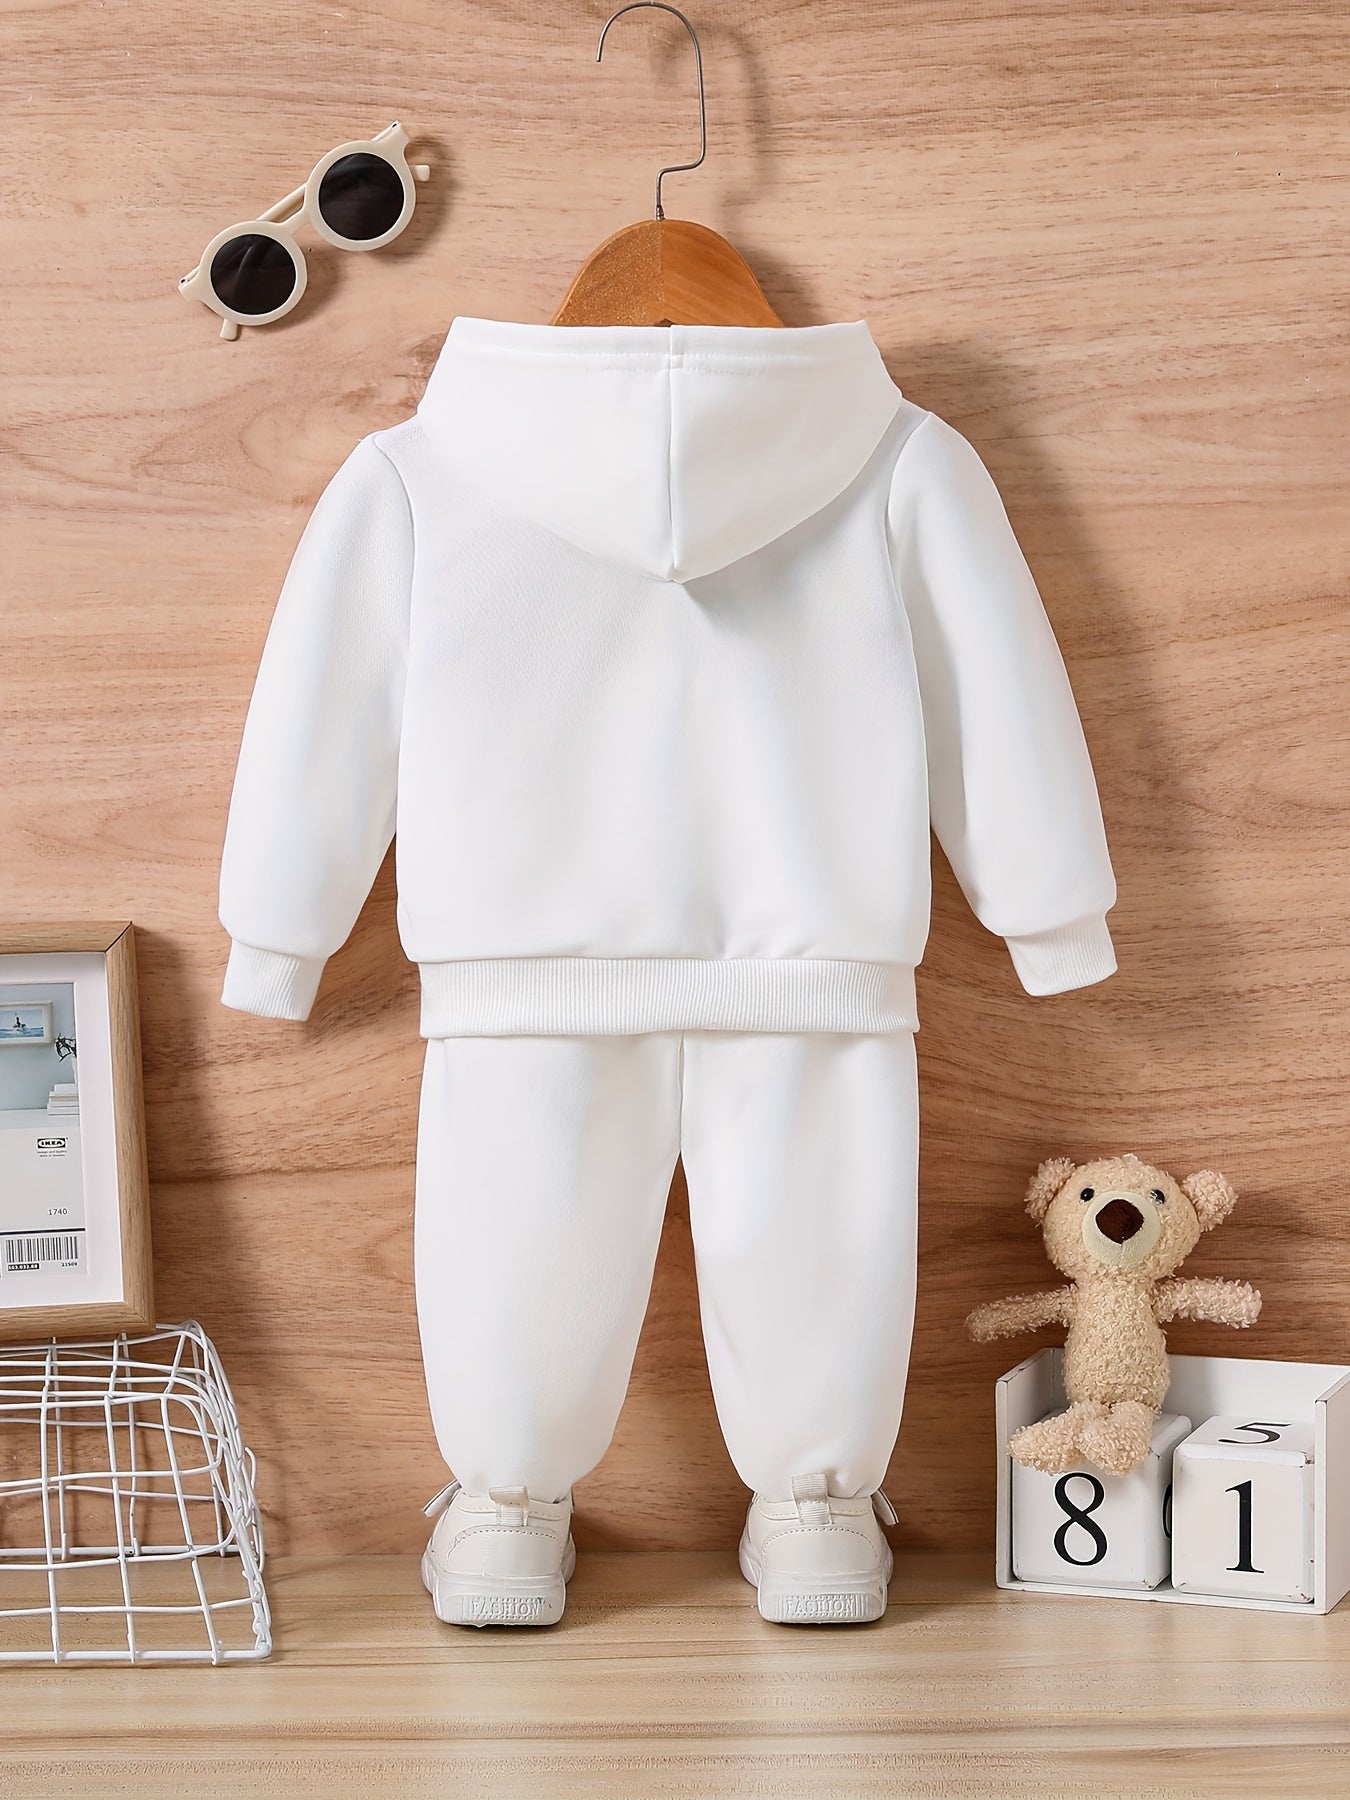 DADDY & ME = BEST FRIENDS Graphic Cute Outfit - Toddler Baby Trousers Long Sleeve Sweatshirt Set